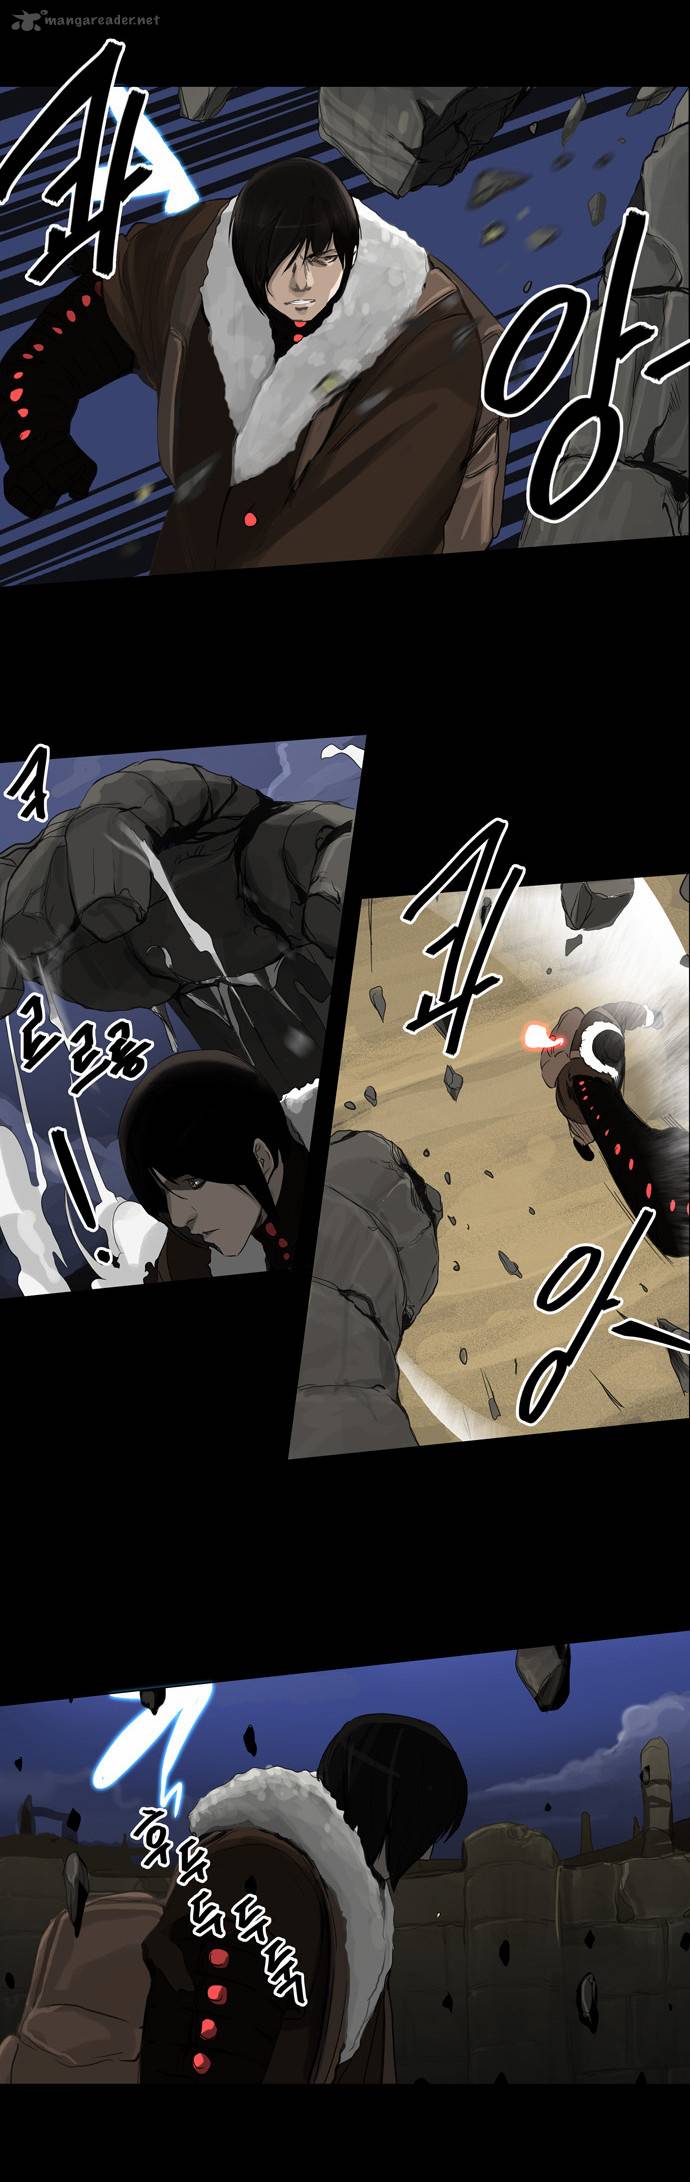 Tower Of God 124 22